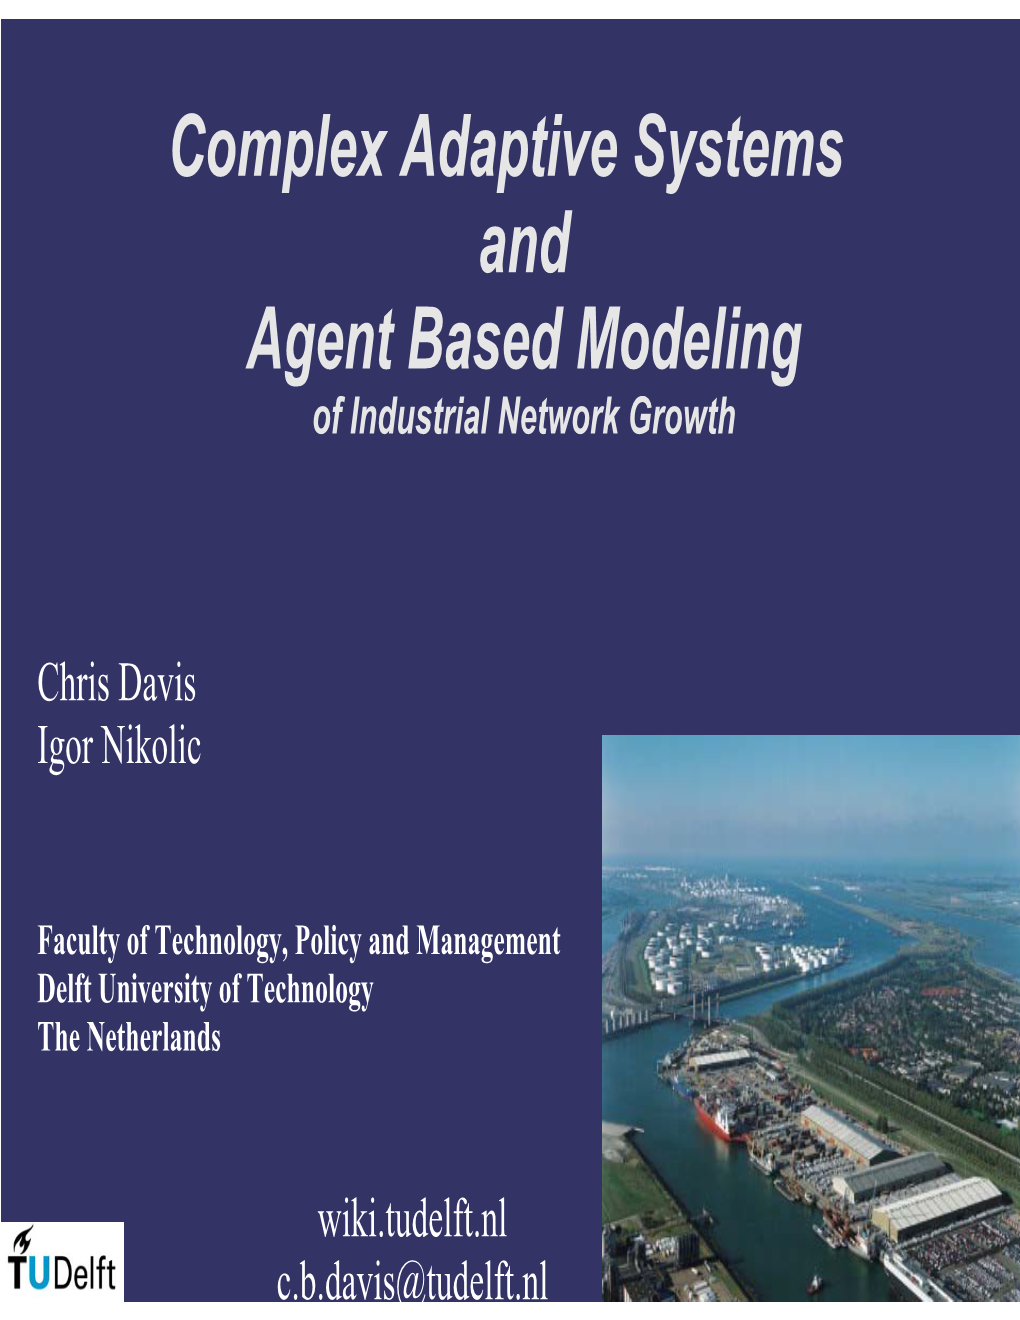 Complex Adaptive Systems and Agent Based Modeling of Industrial Network Growth